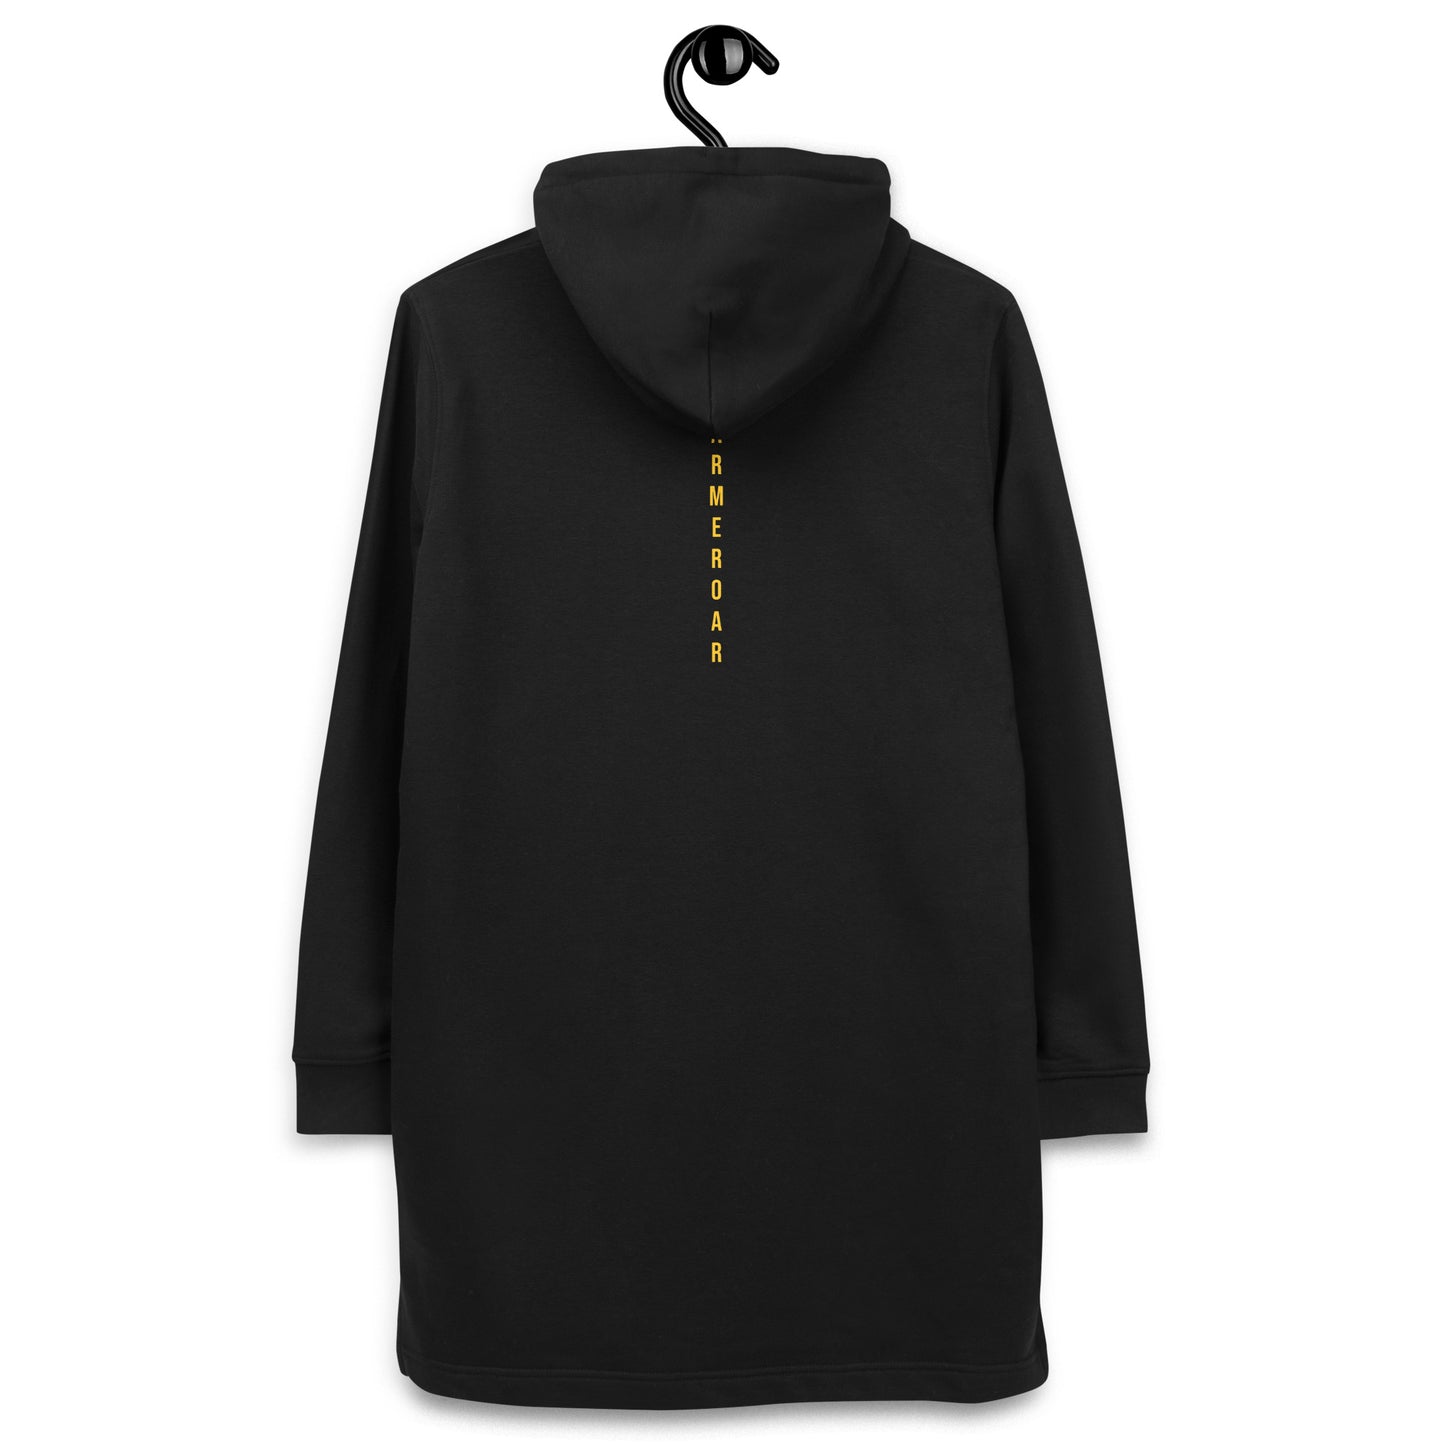 Be A Good Person Embroidered Hoodie Dress